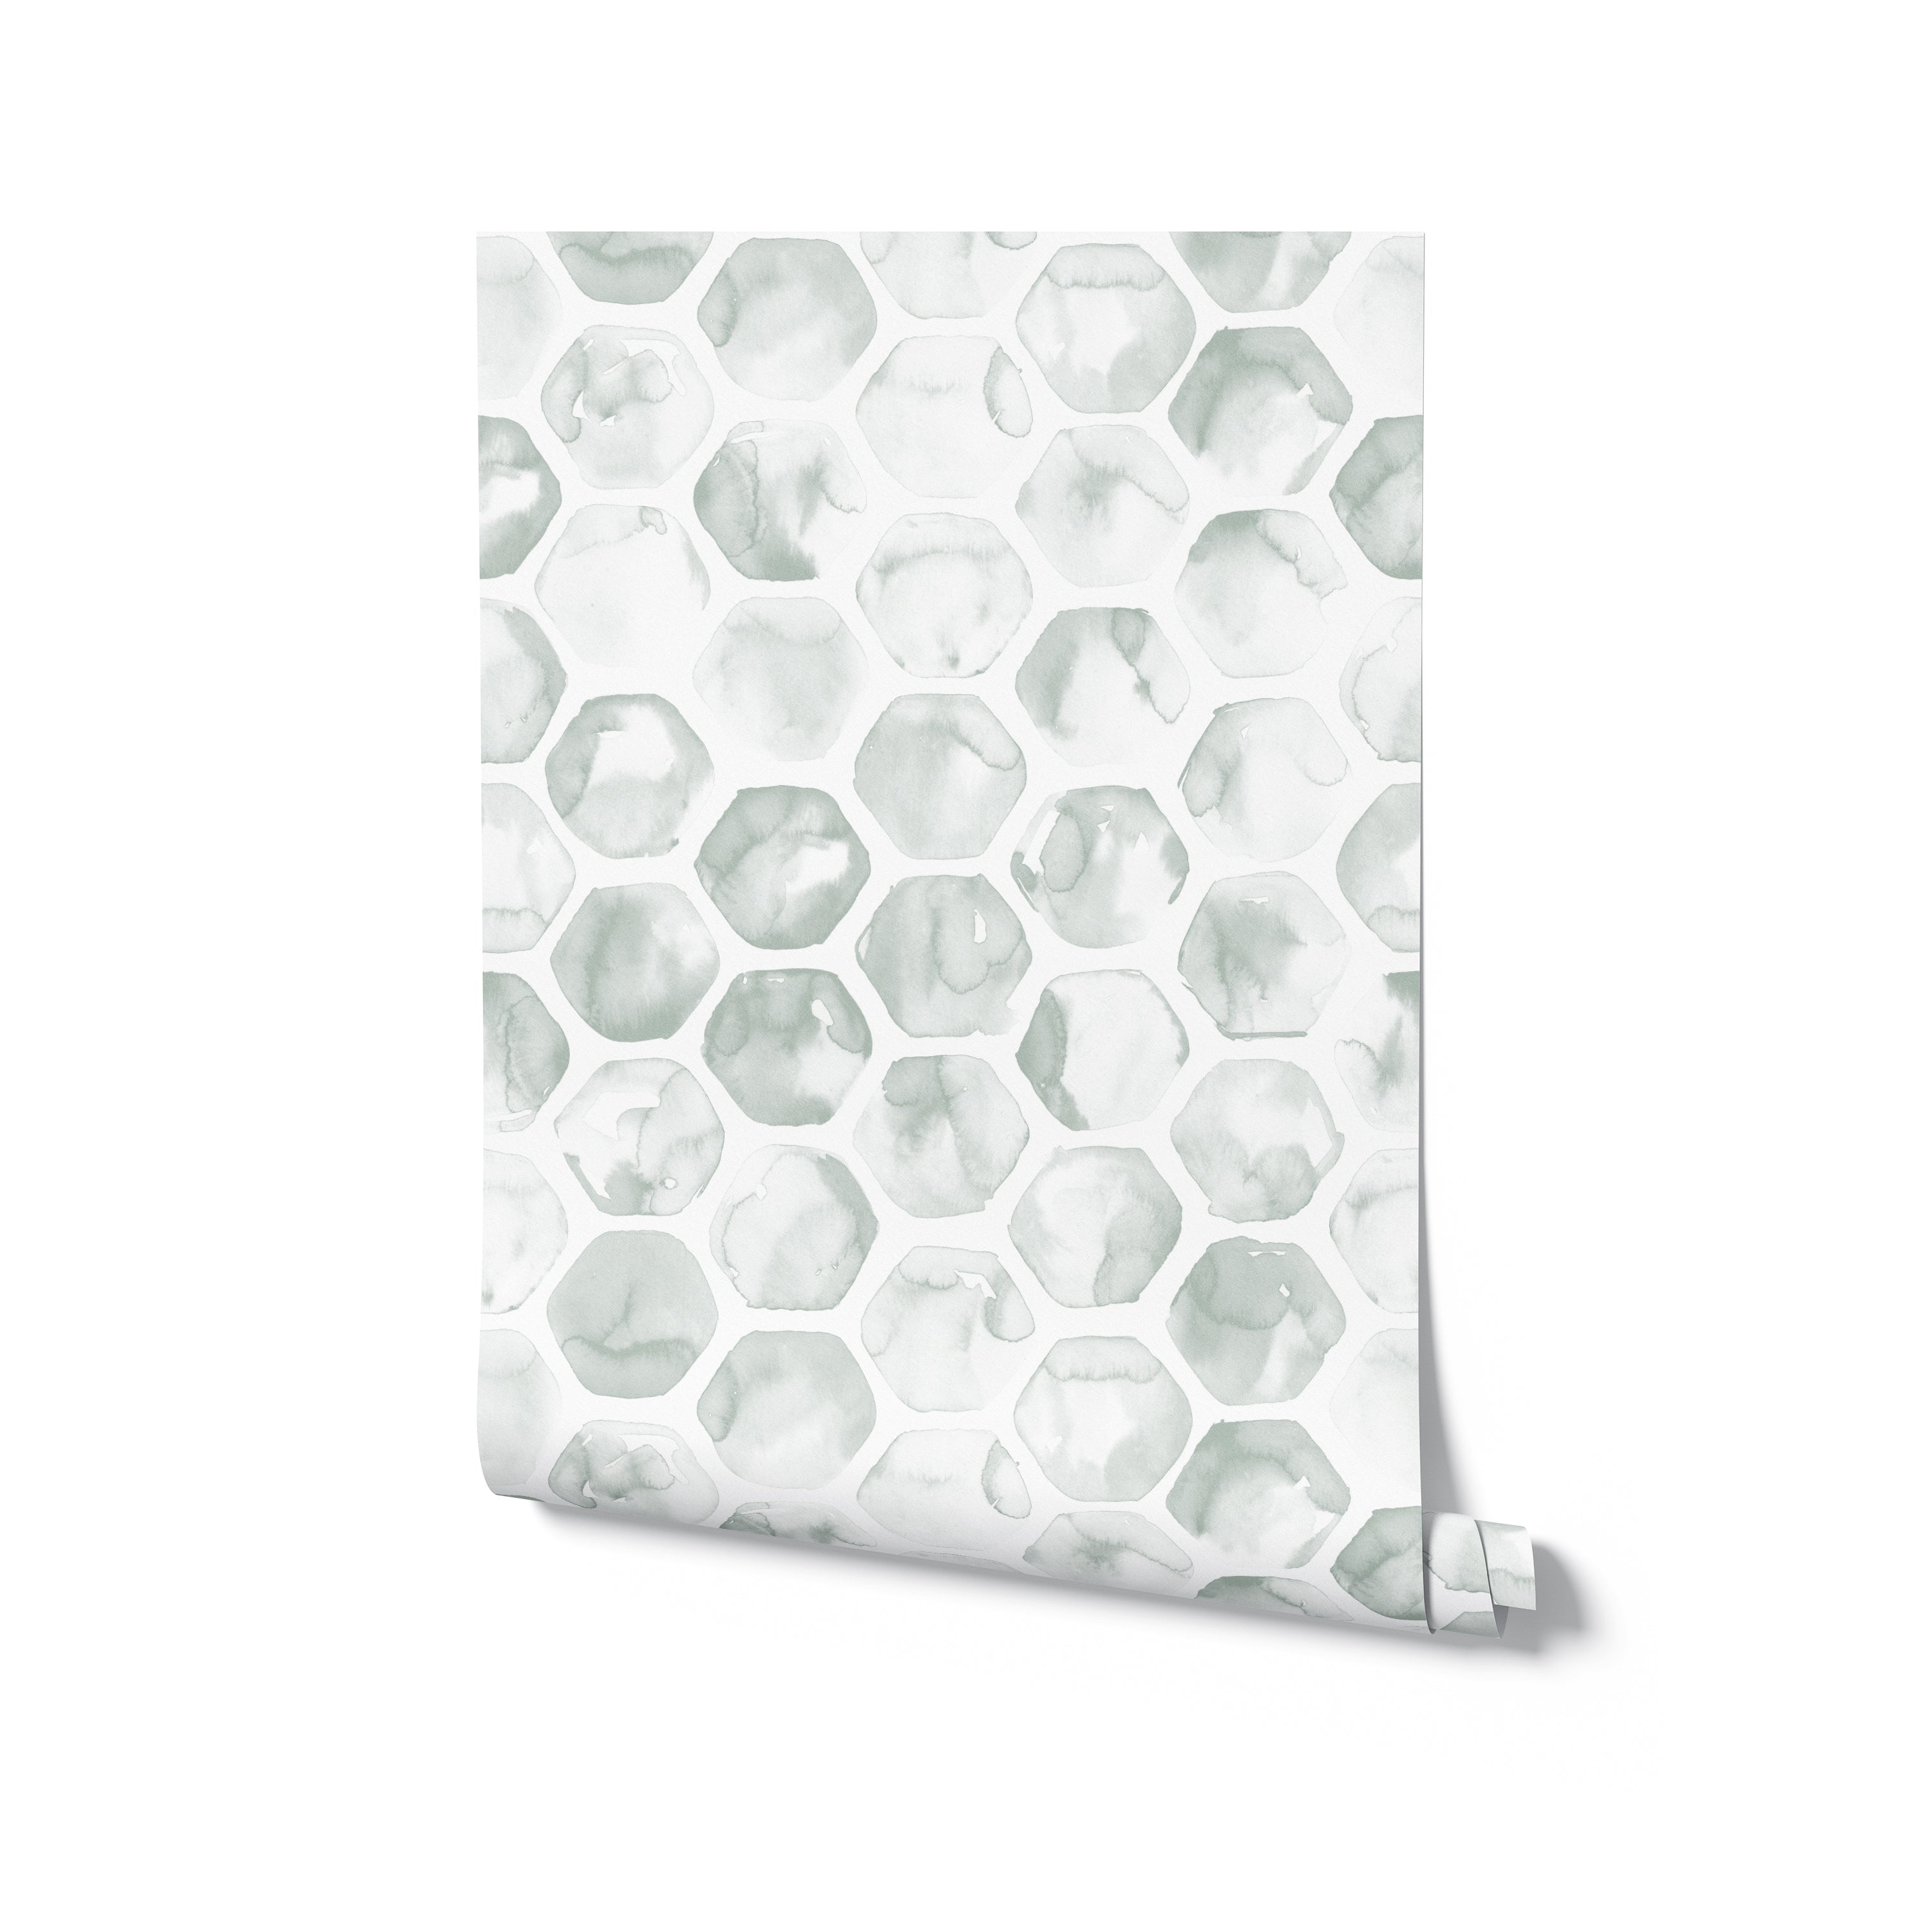 "A roll of Watercolour Honeycomb Wallpaper with the design visible on the partially unrolled end, illustrating the pattern's variation in watercolor intensity and shape irregularity, against a pure white background."